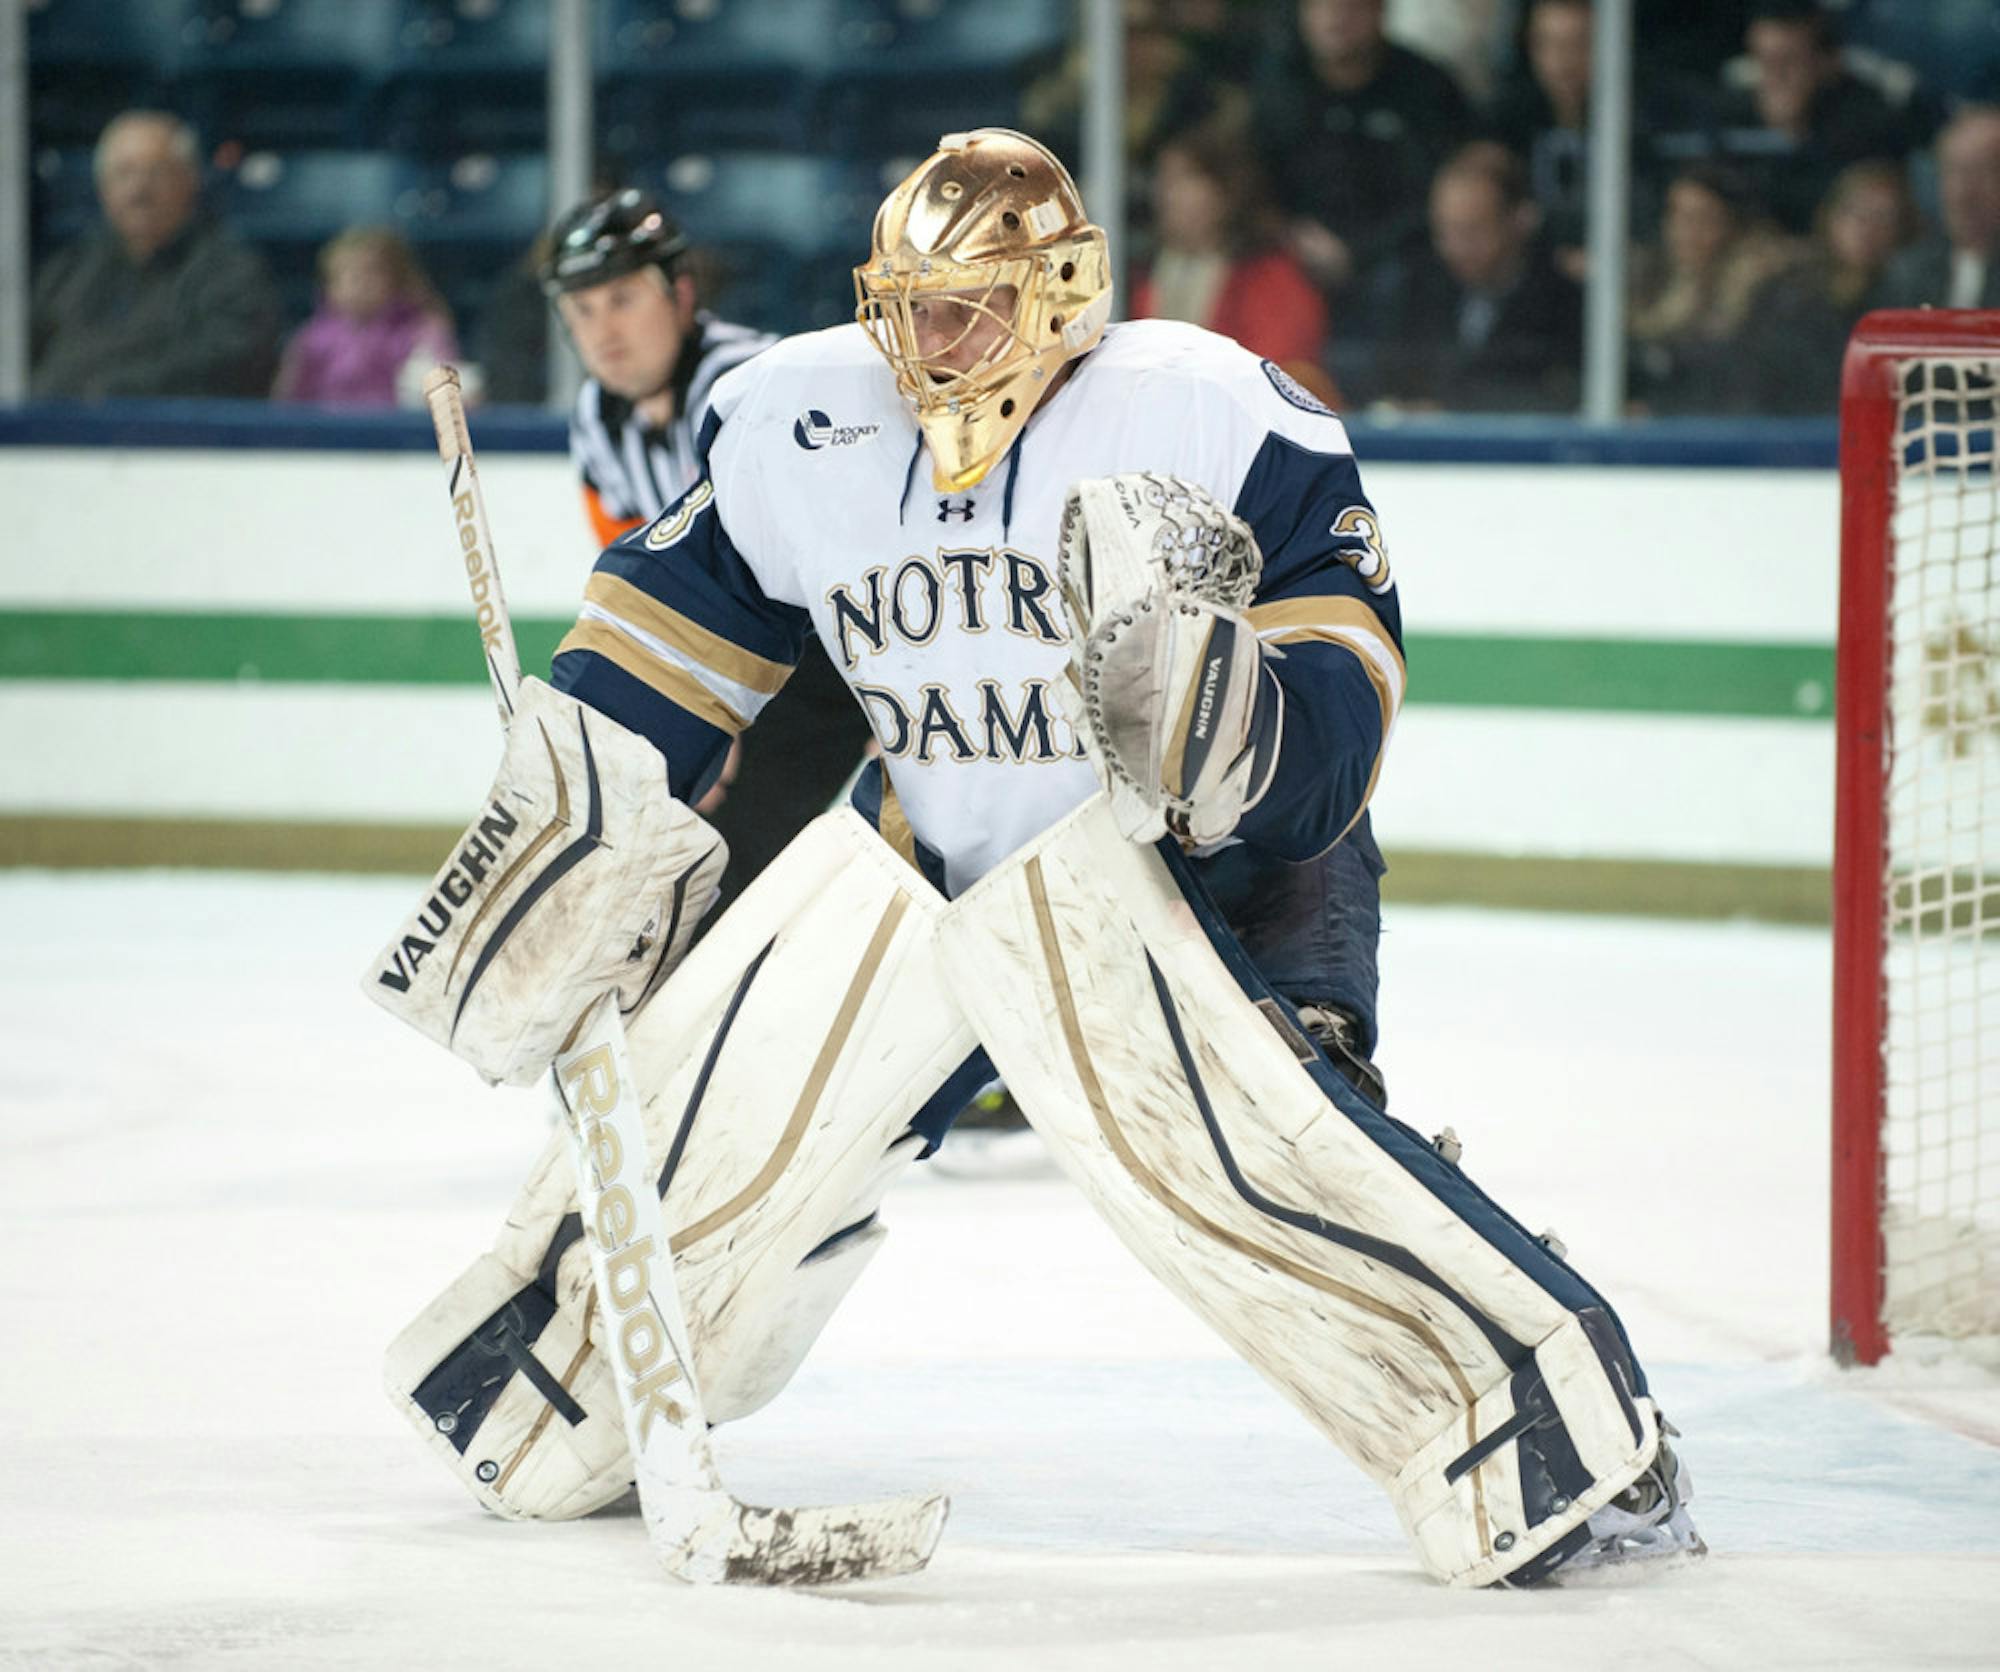 Irish sophomore goalie Chad Katunar waits for the puck to drop against Union at Compton Family Ice Arena on Nov. 28. Notre Dame fell in overtime, 3-2.